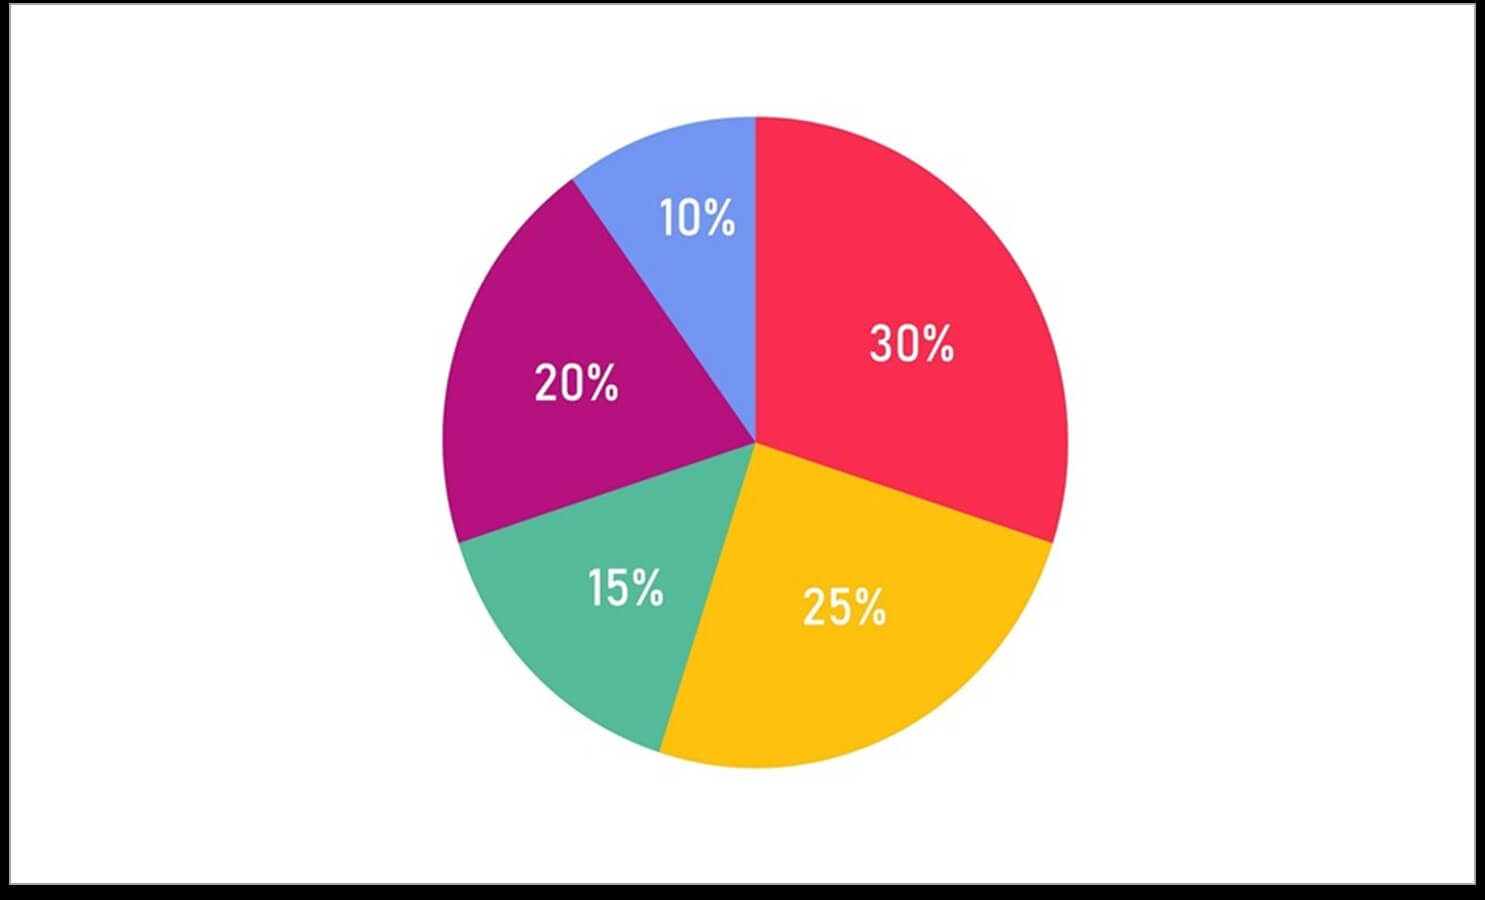 Pie charts are an extremely common type of chart that one can put into a sales pitch deck